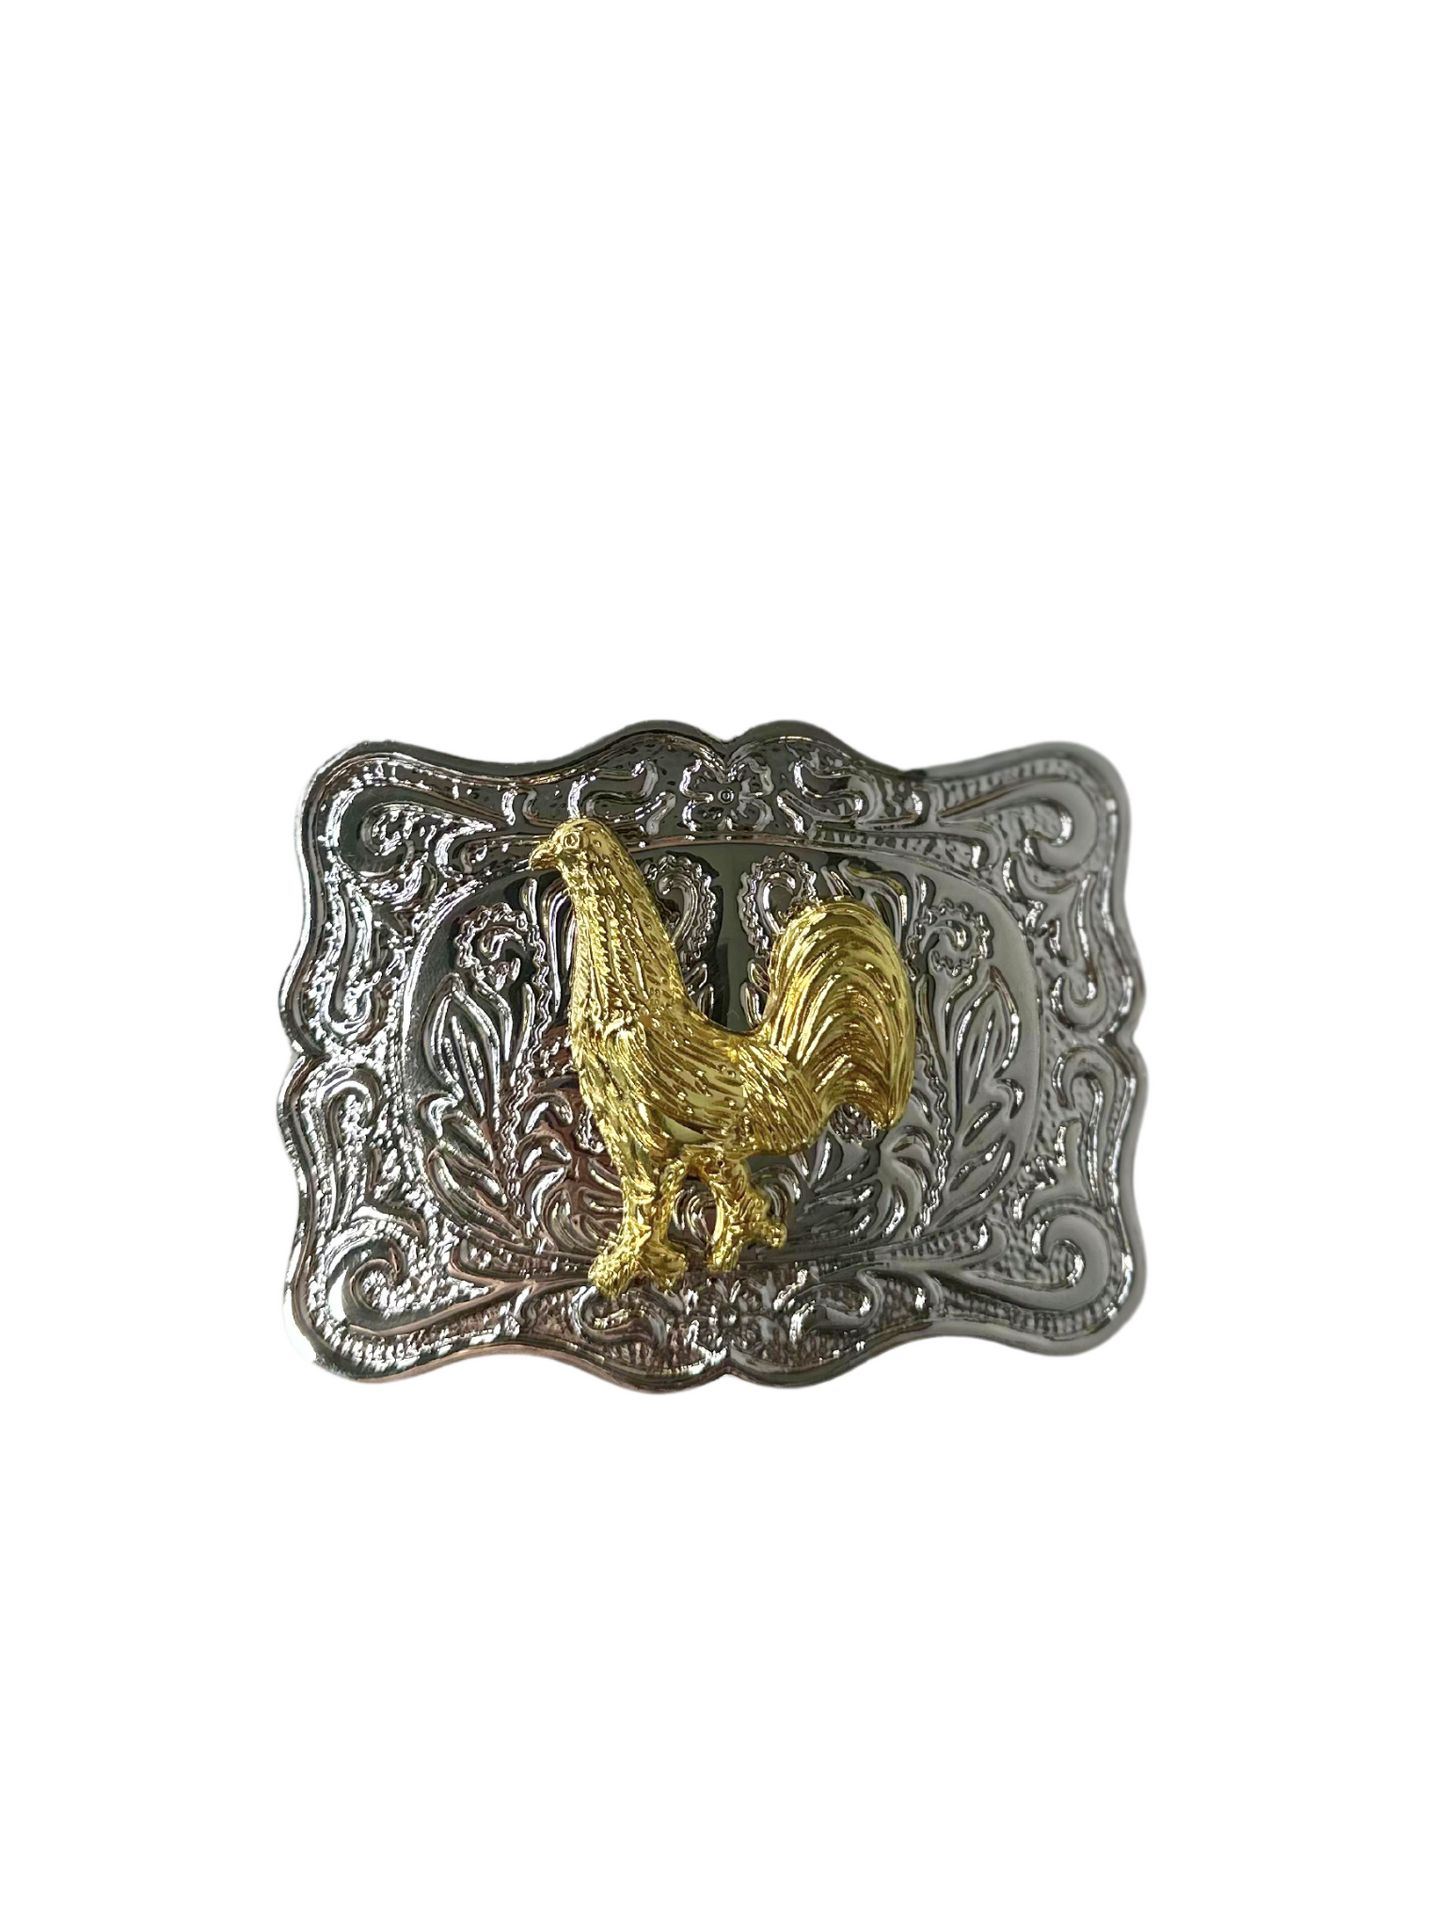 Rooster Buckle - Silver/Gold